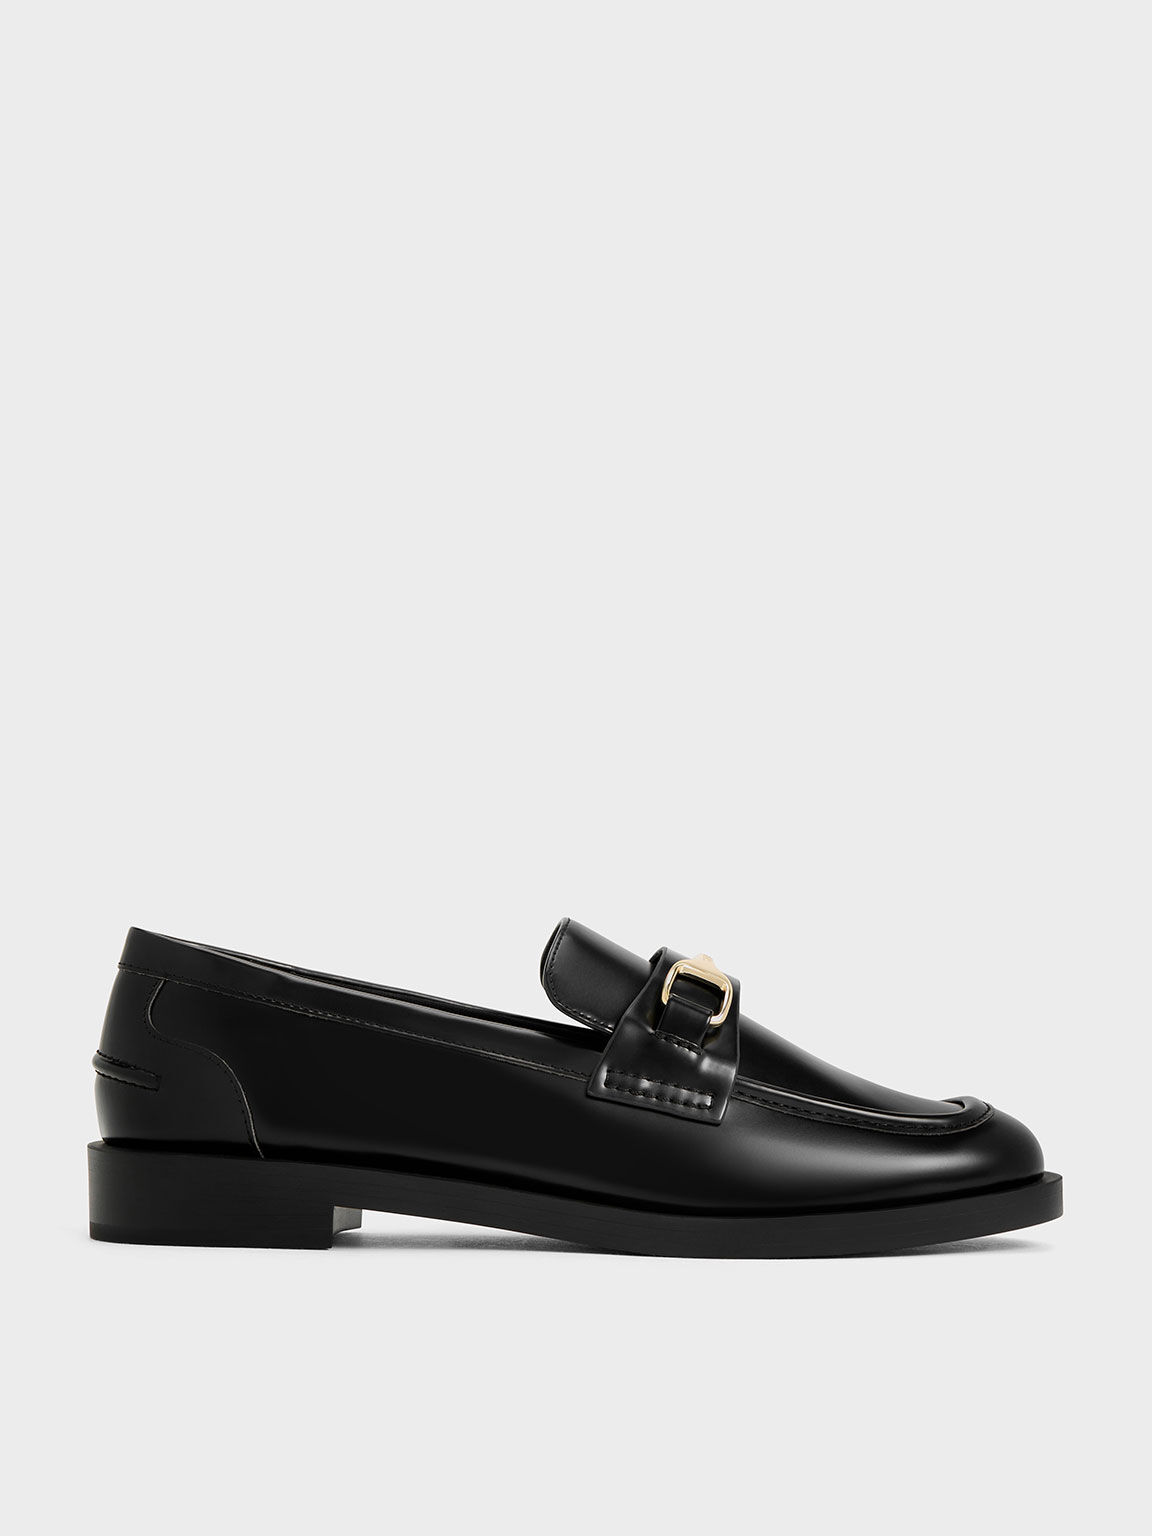 Leslie Metallic-Accent Loafers, Black Boxed, hi-res